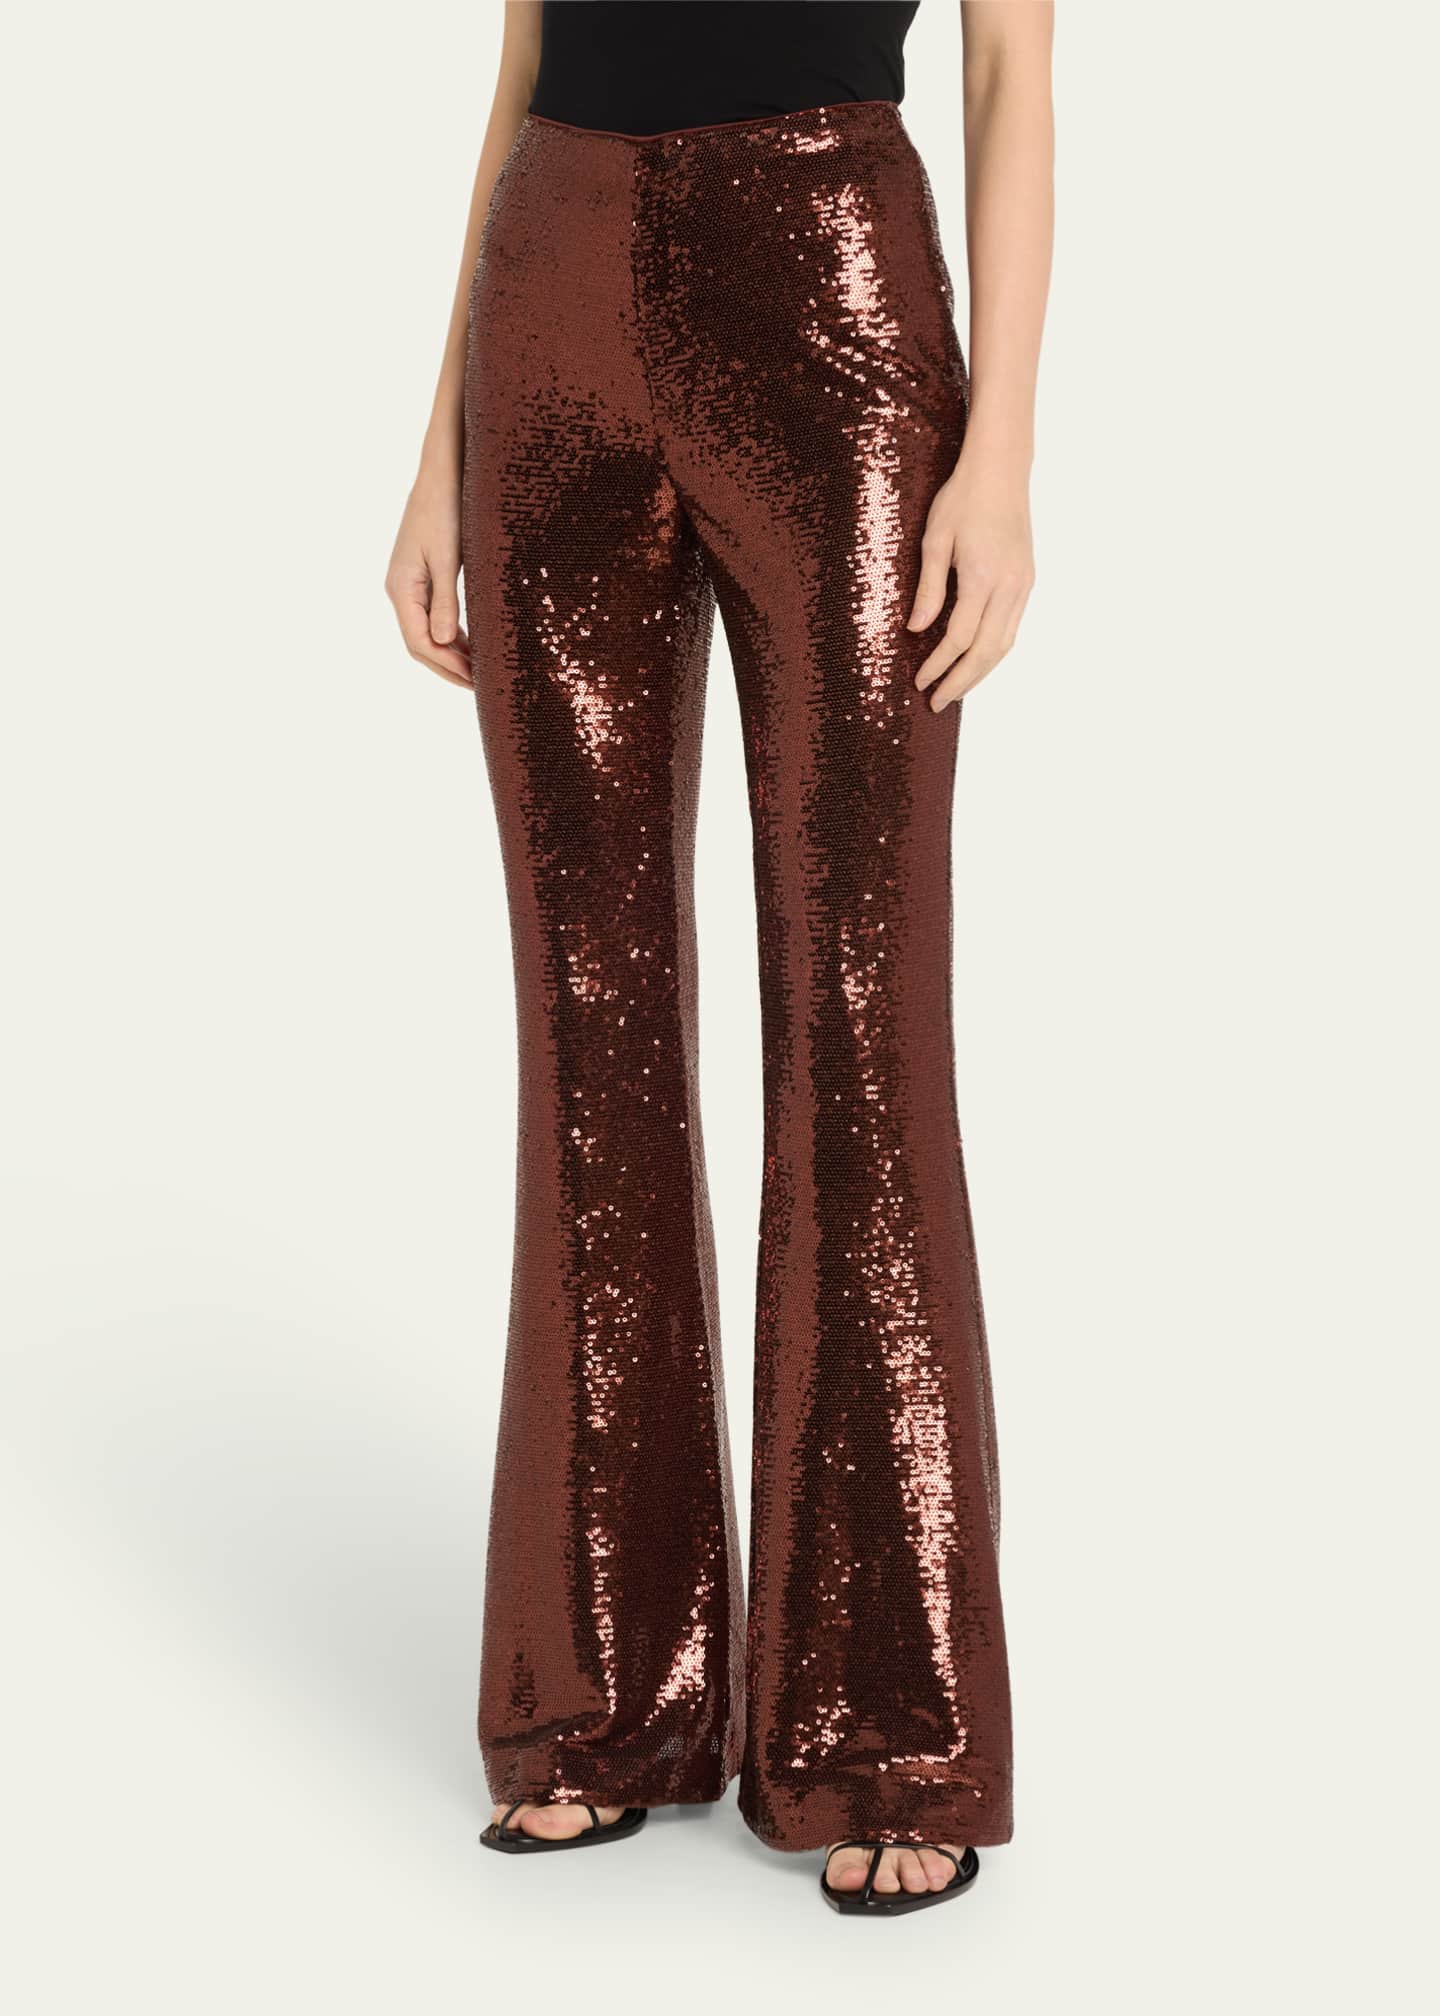 L'Agence Honor Sequined Flare Pants - Bergdorf Goodman